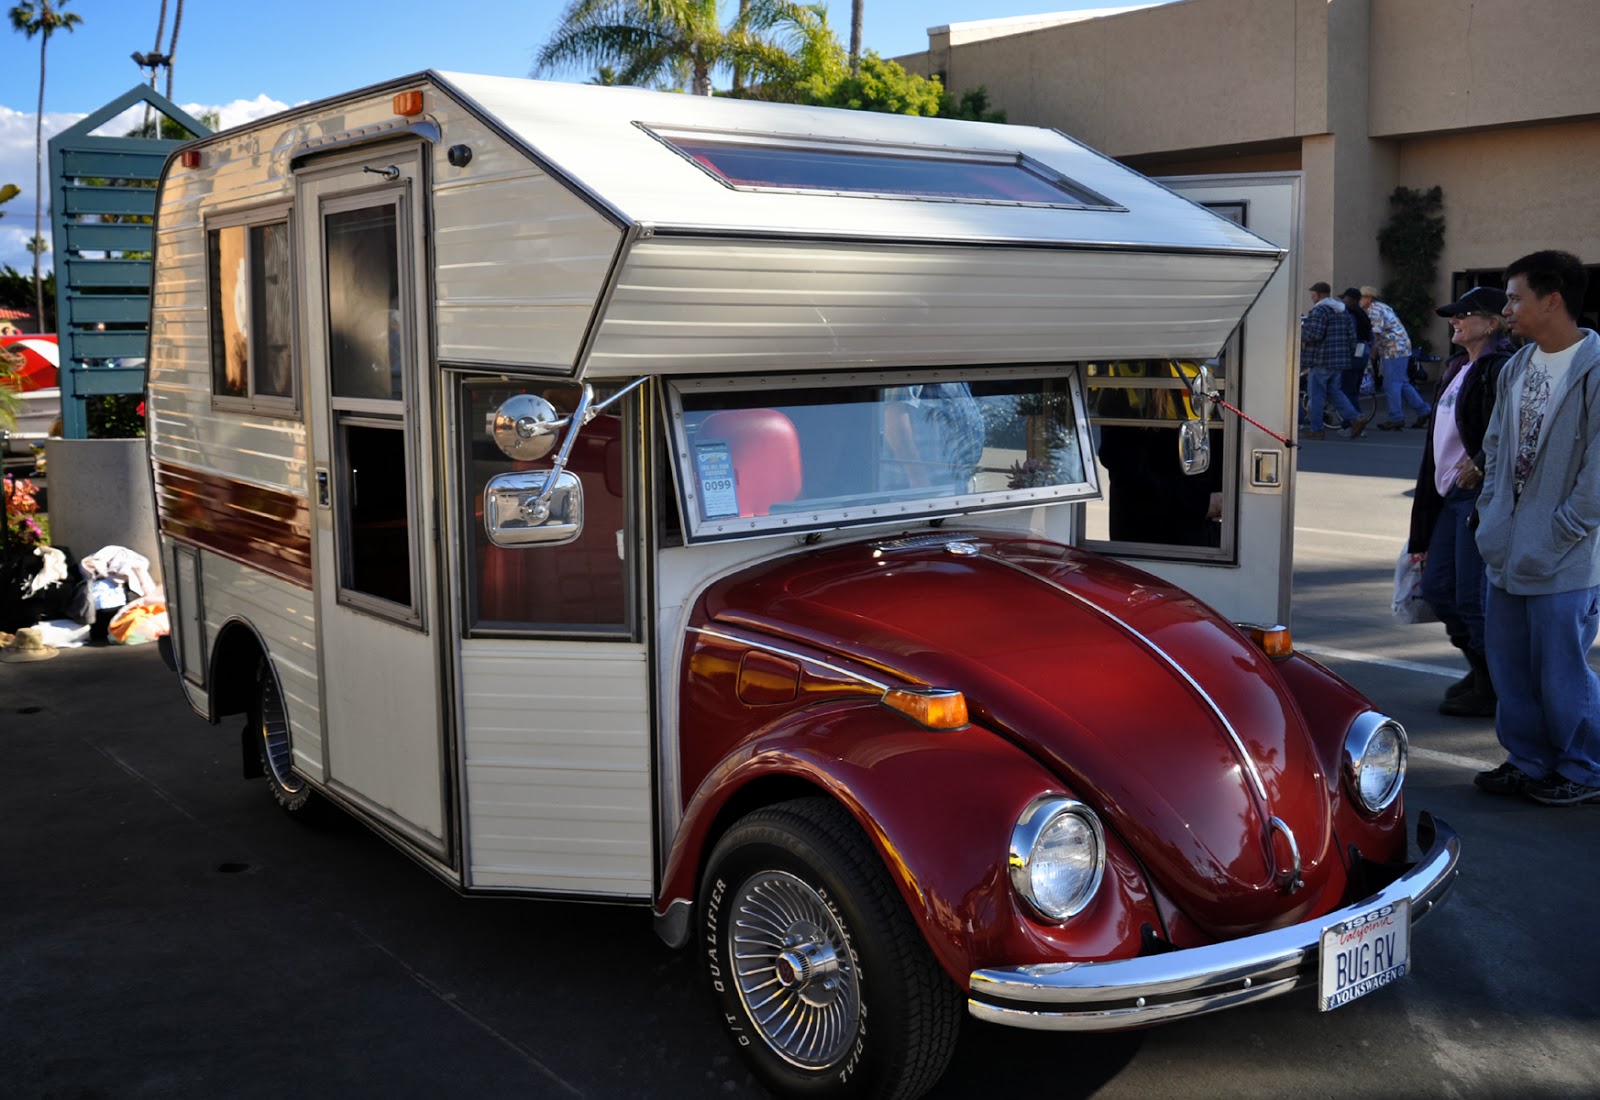 Vw Cool Cars Bug Rv Camper Volkswagen Guys Bugs Rvs Recreational Vehicles A...